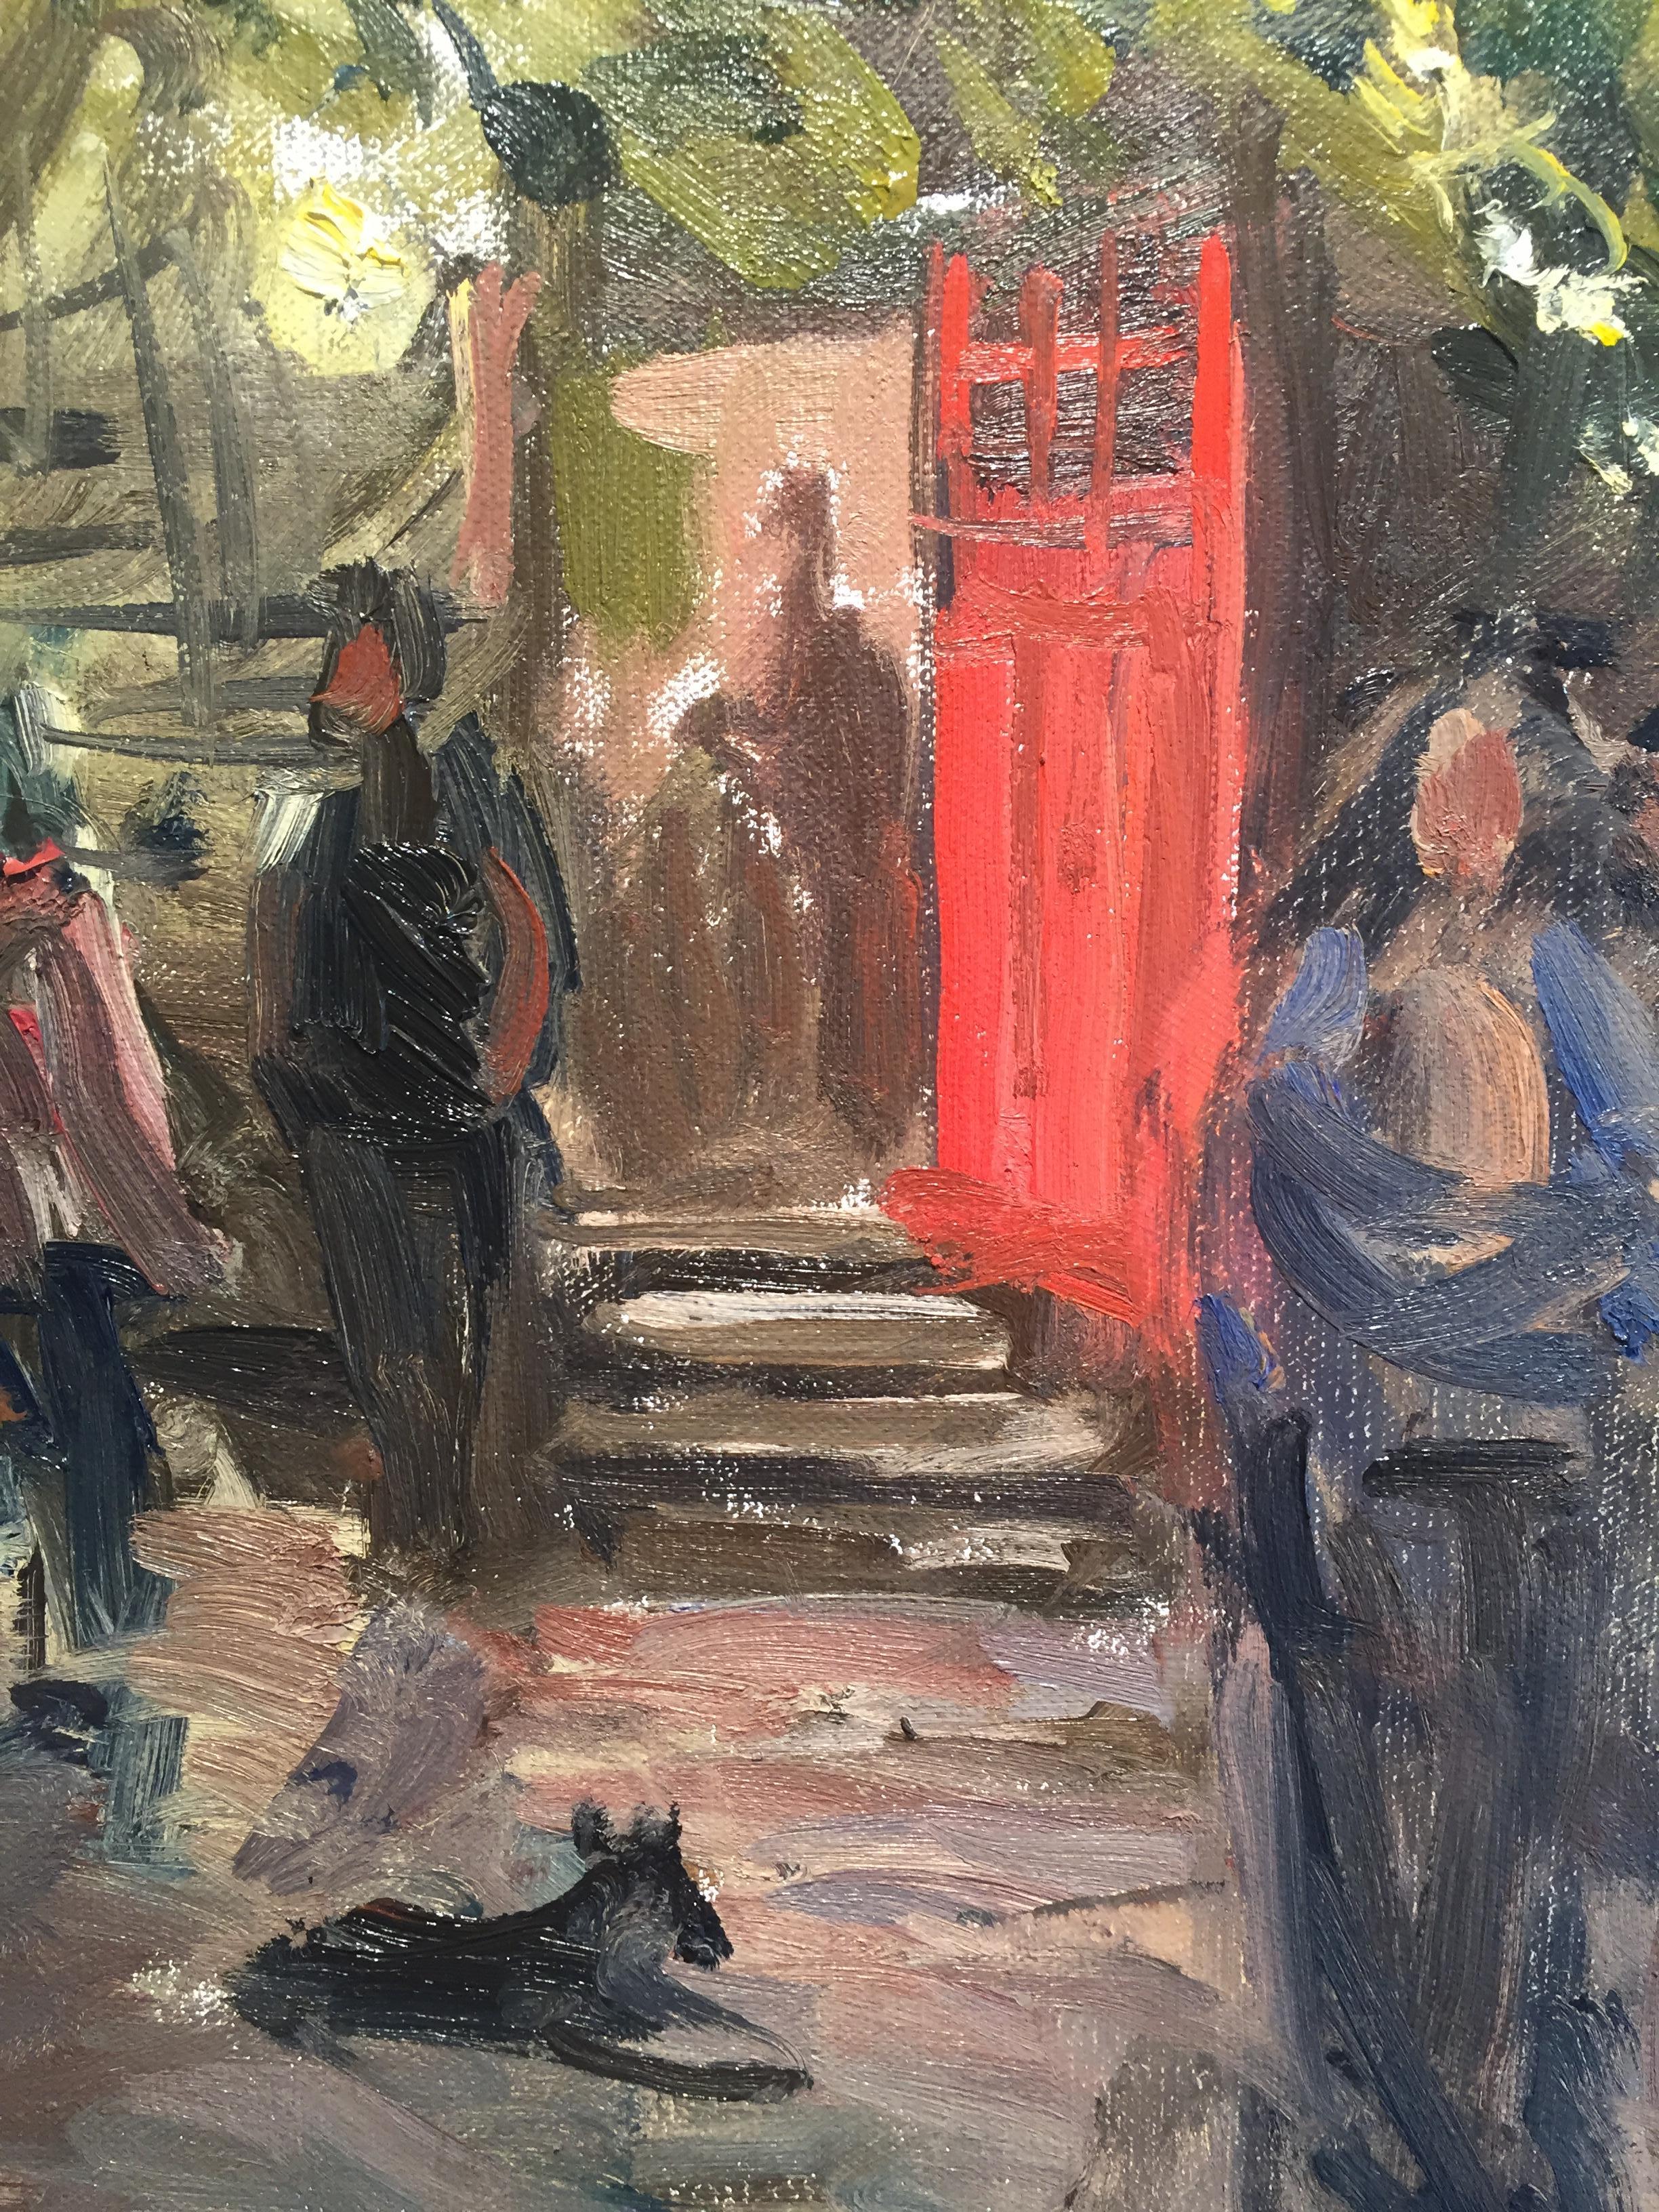 Painted en plein air at Murfs Backstreet Tavern in Sag Harbor, New York. An old dive bar from the late 1700's where locals and tourists come to play darts, ringtoss, and scroll through the jukebox. Butko preserved the energy and atmosphere of the